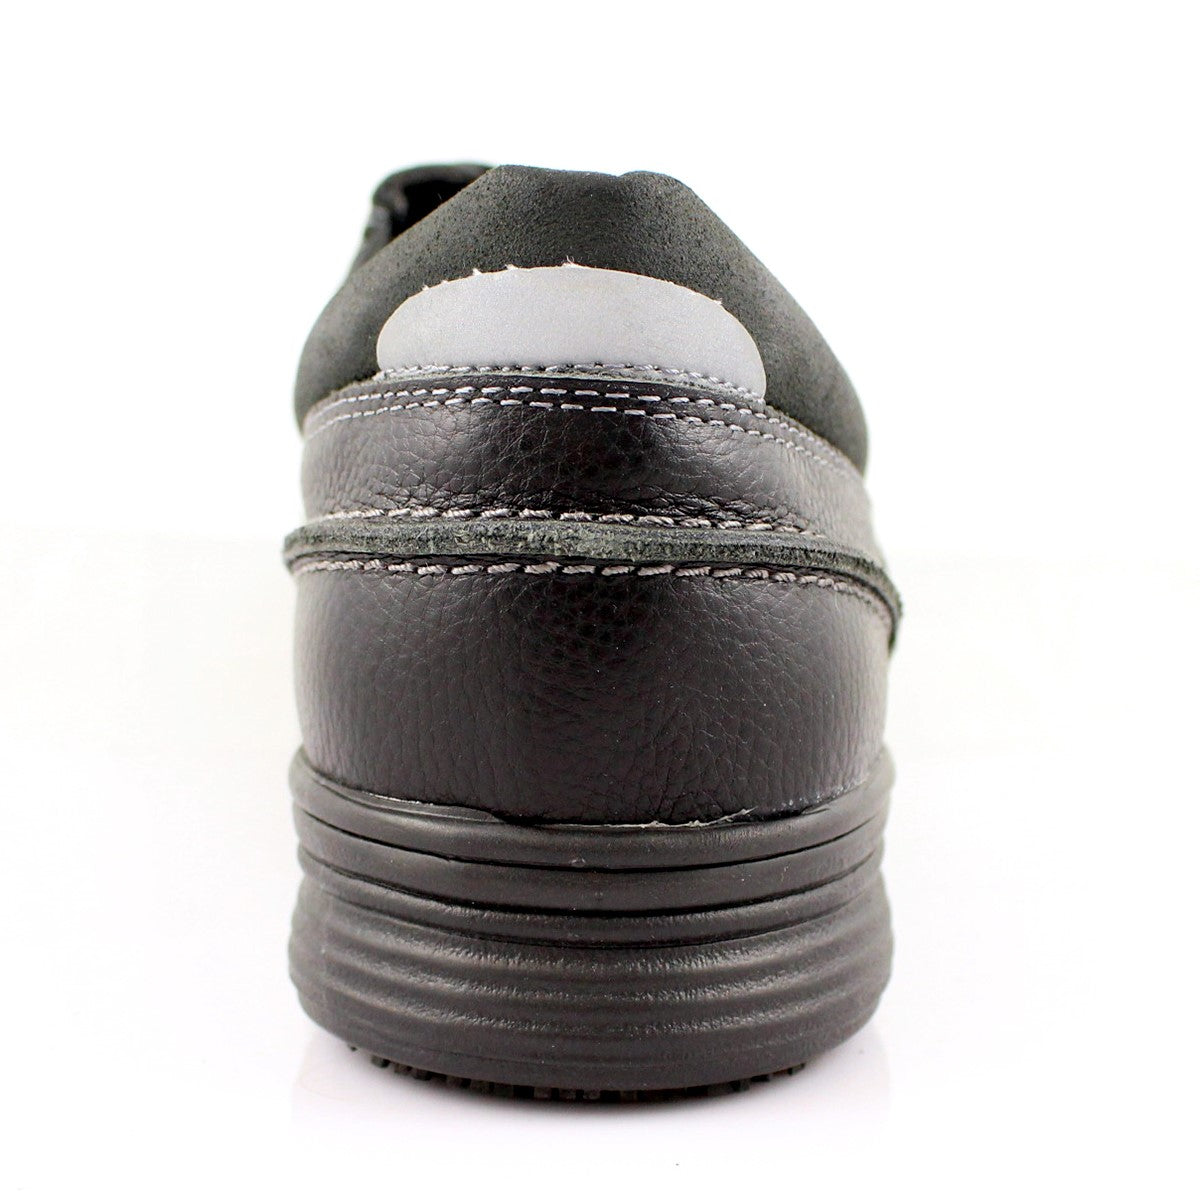 Geoff 9450-01 / Composite Safety Toe